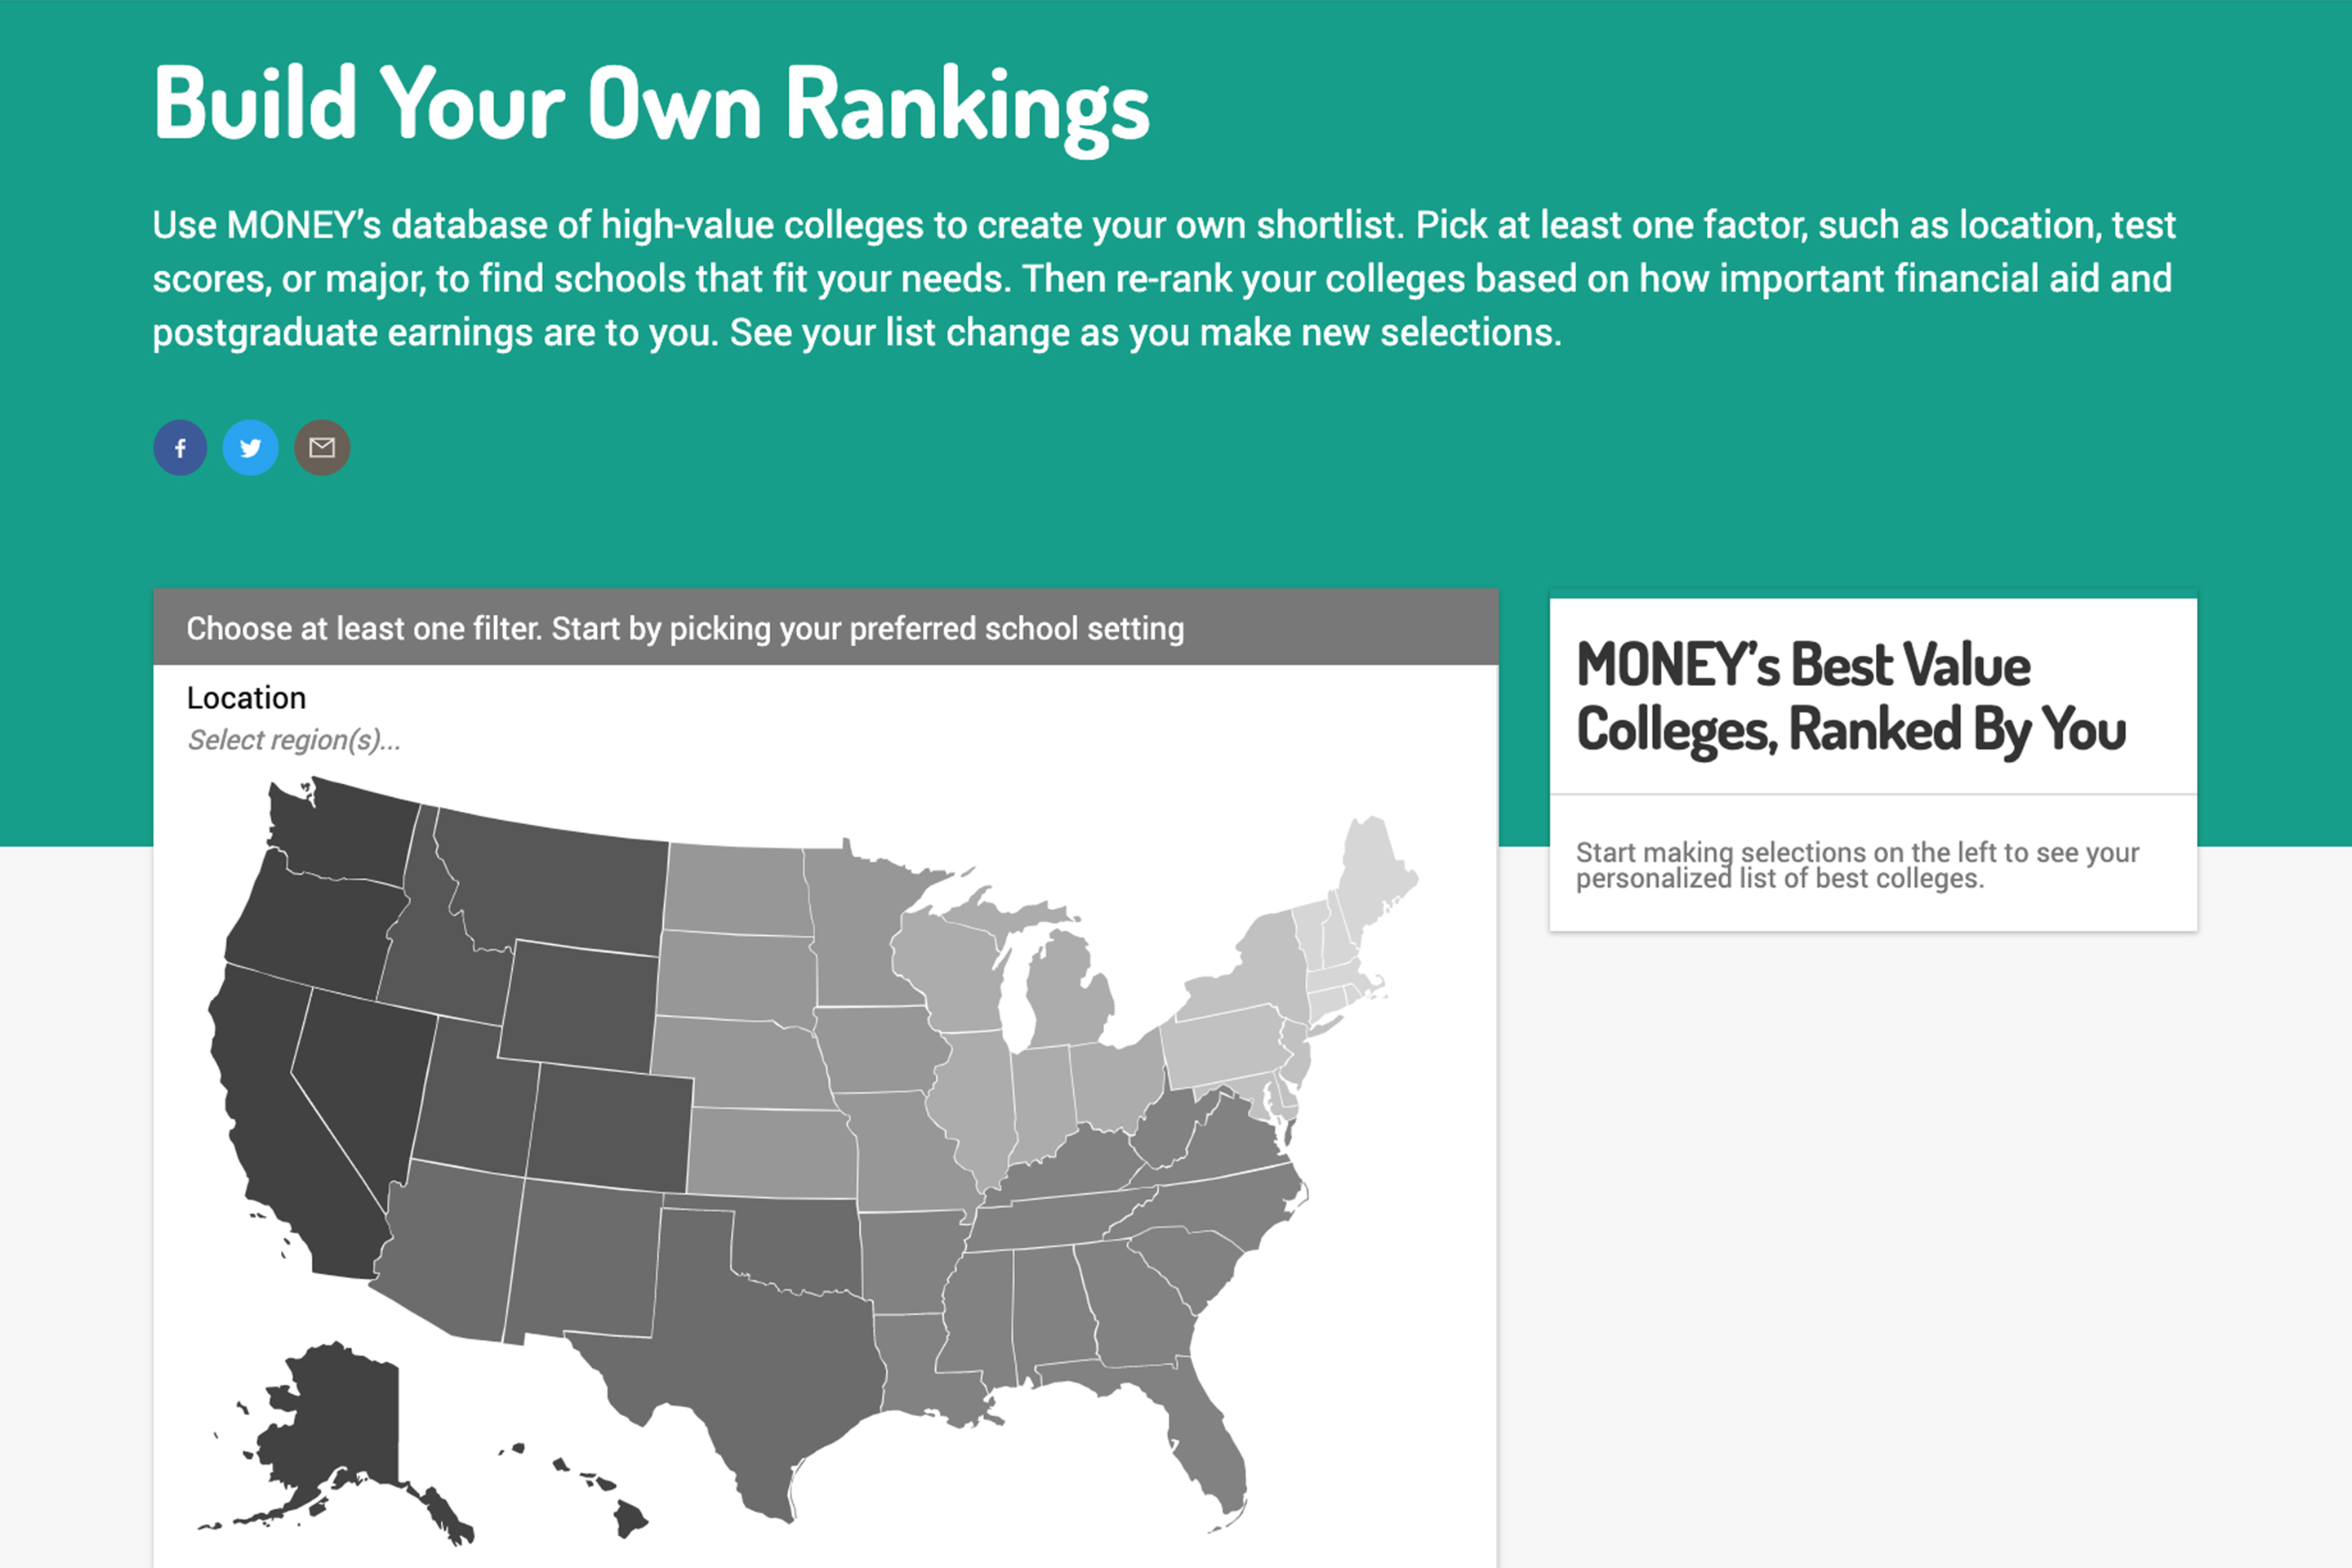 Use Money's database of high-value colleges to create your own shortlist.